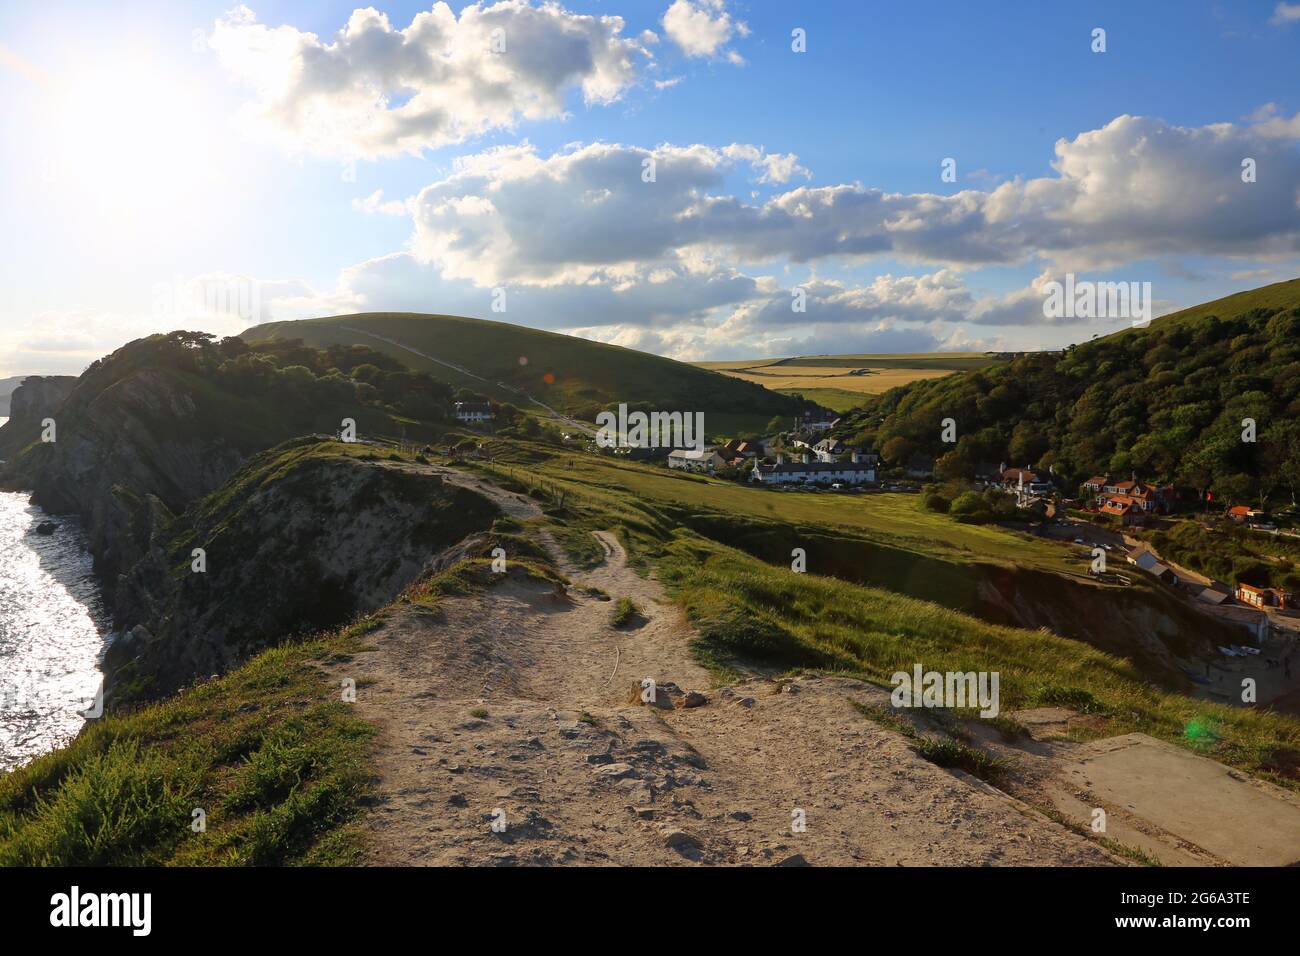 Staycation in Lulworth Cove, Dorset Stock Photo